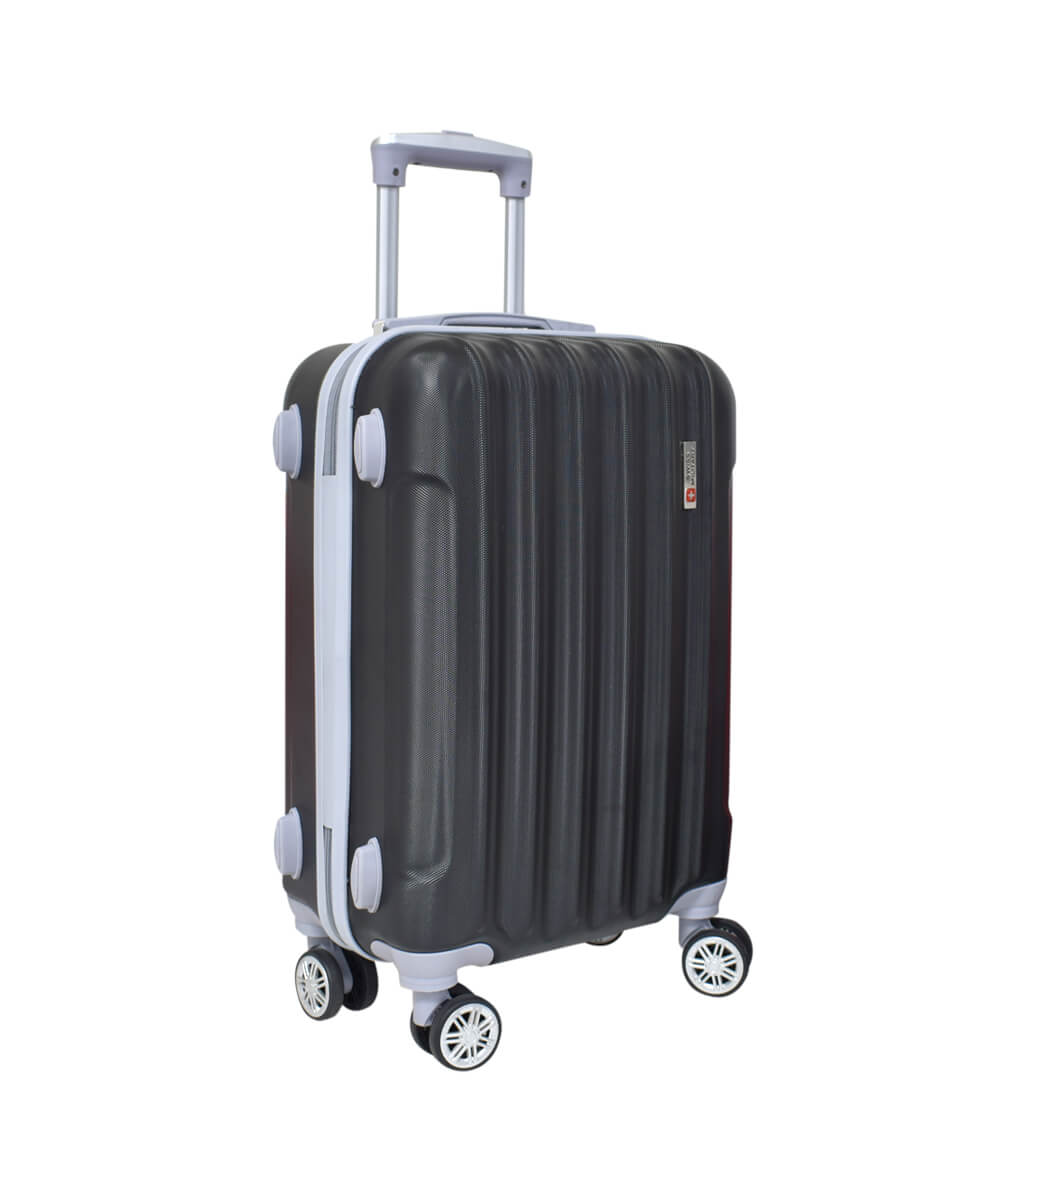 HTL83_TW2 – Polycarbonate Cabin Size Luggage with Travel Luggage Belt (HTL83+TW2)